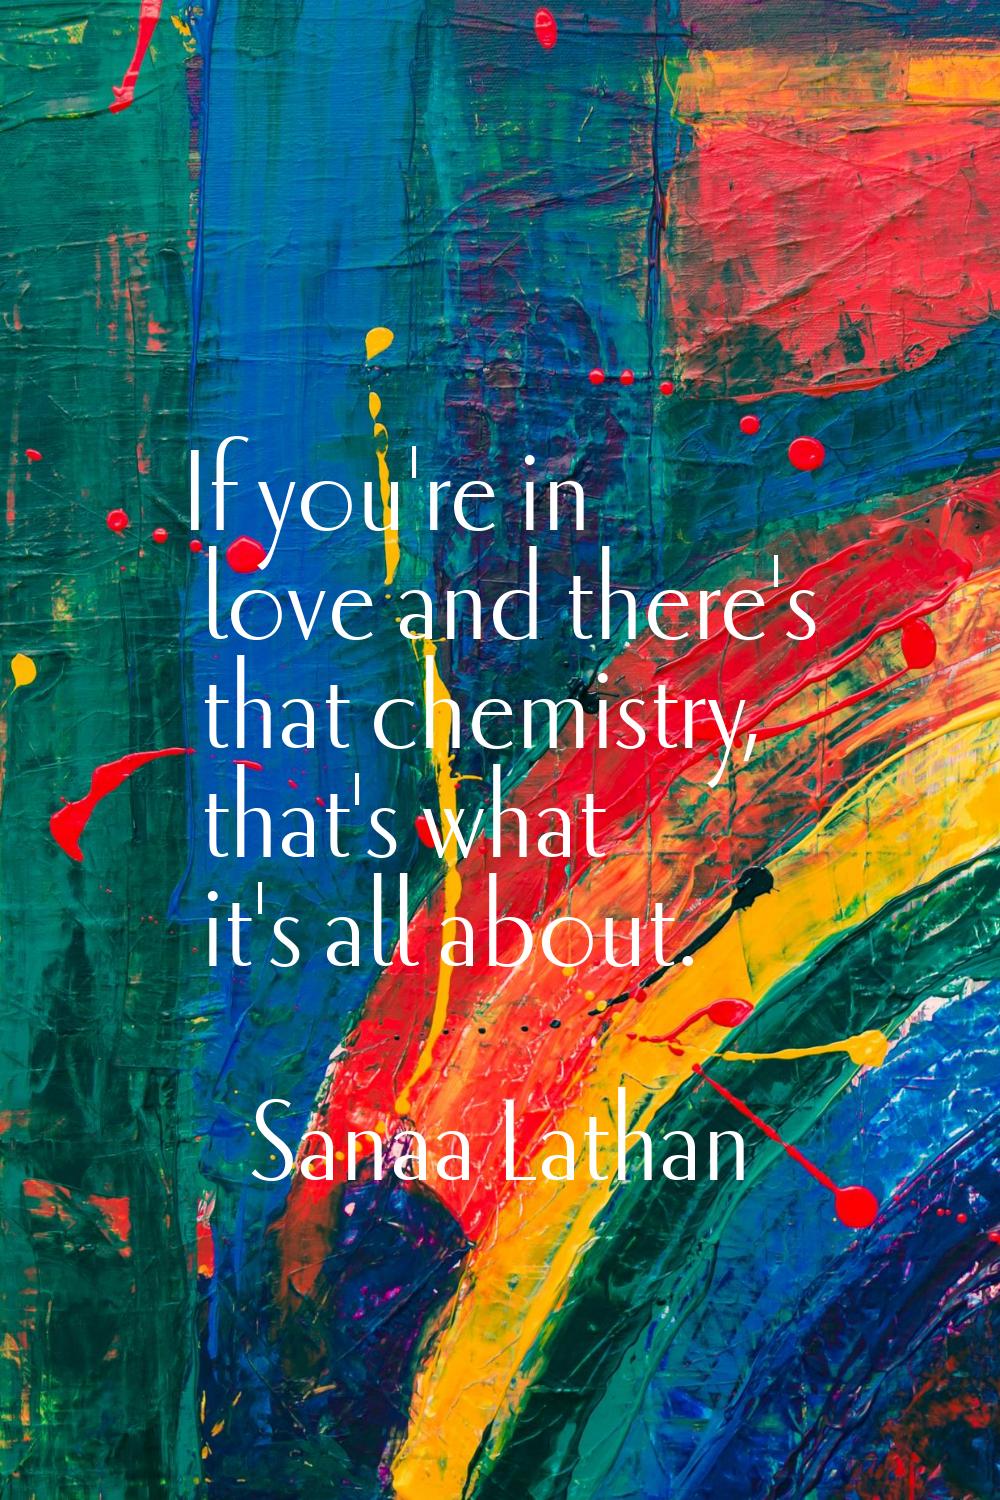 If you're in love and there's that chemistry, that's what it's all about.